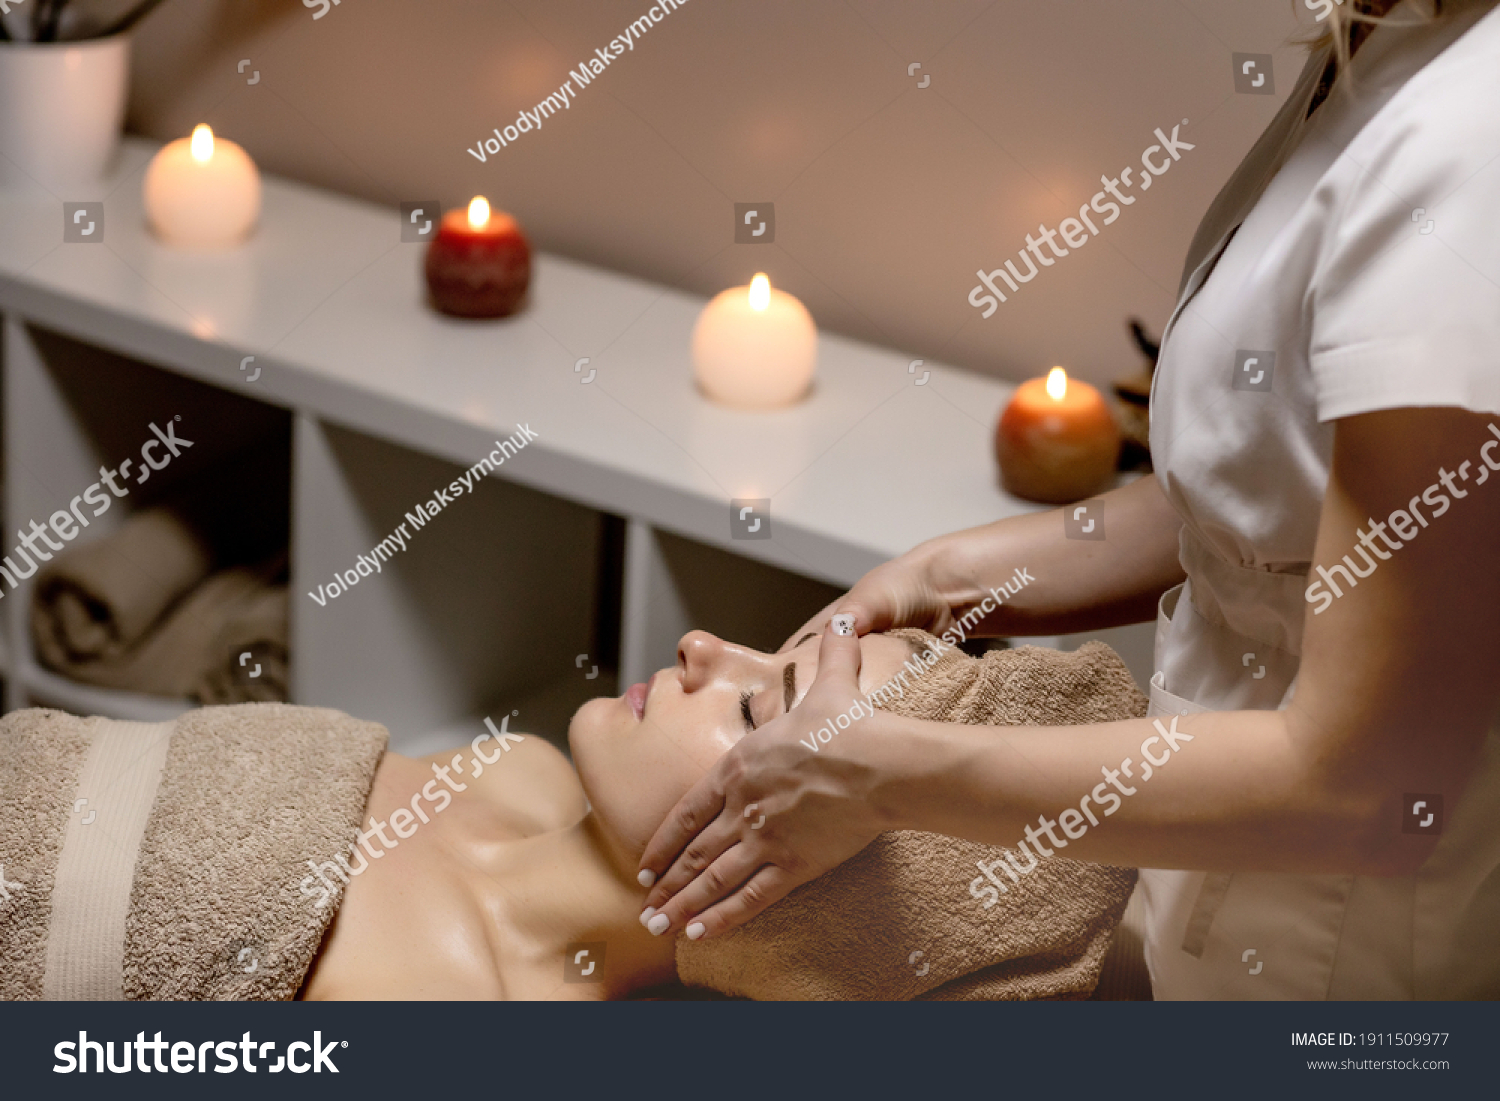 Relaxing massage. Woman receiving head massage at spa salon, side view. #1911509977